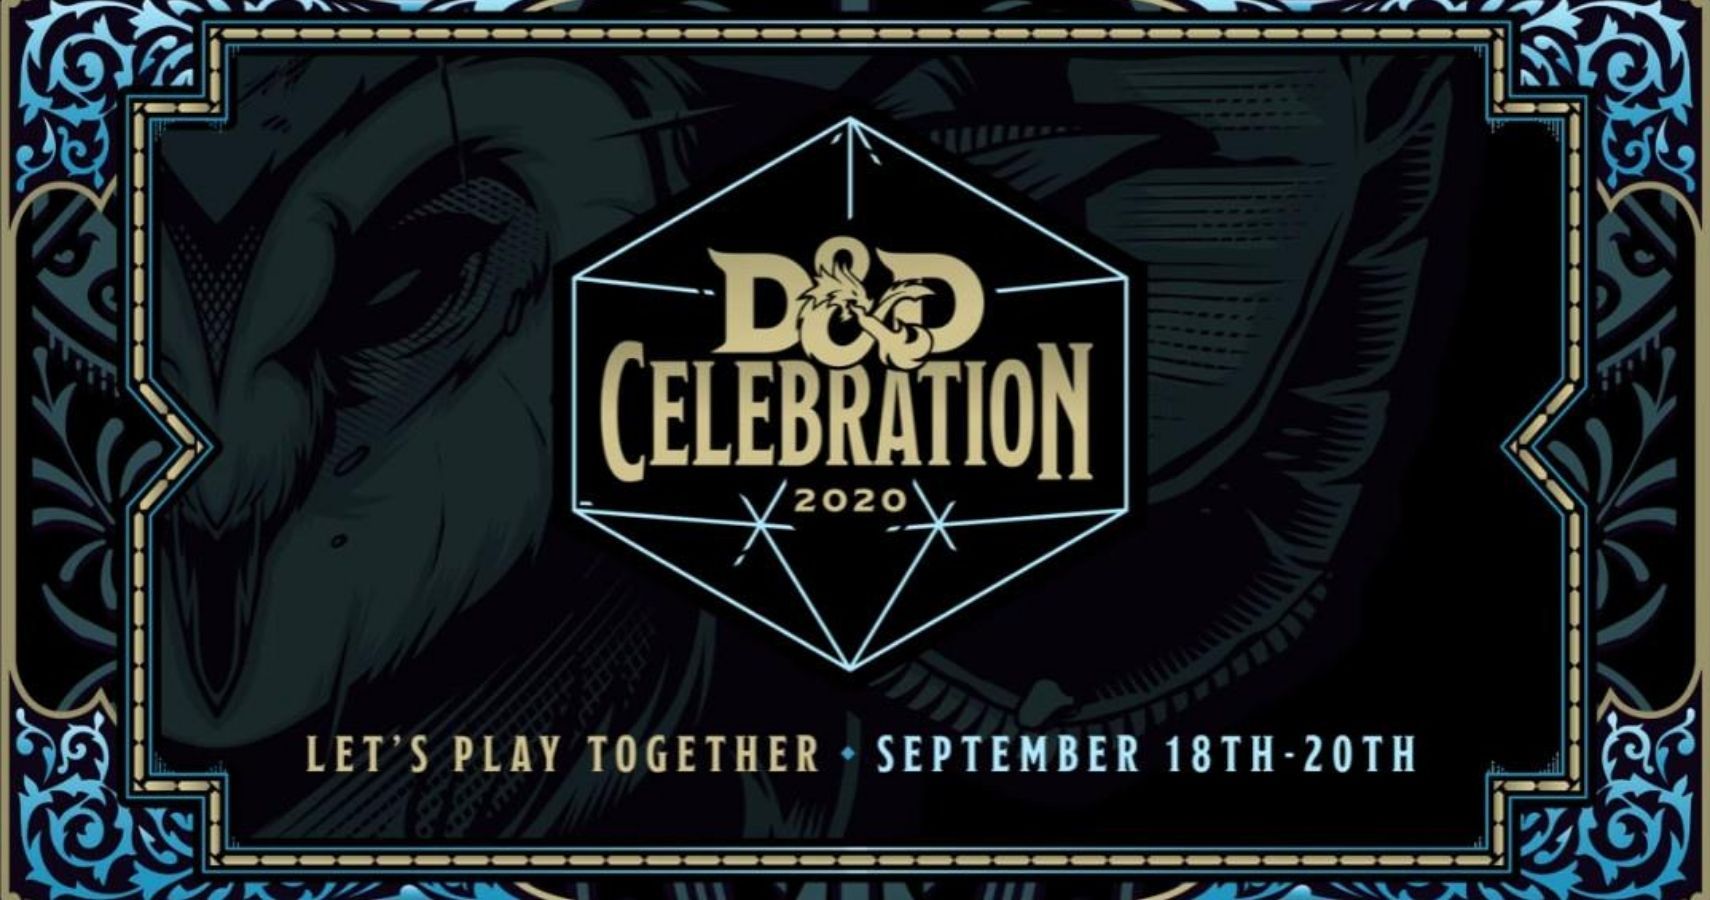 WOTC Gathered Party Of Celebrity Roleplayers To Announce D&D Celebration 2020